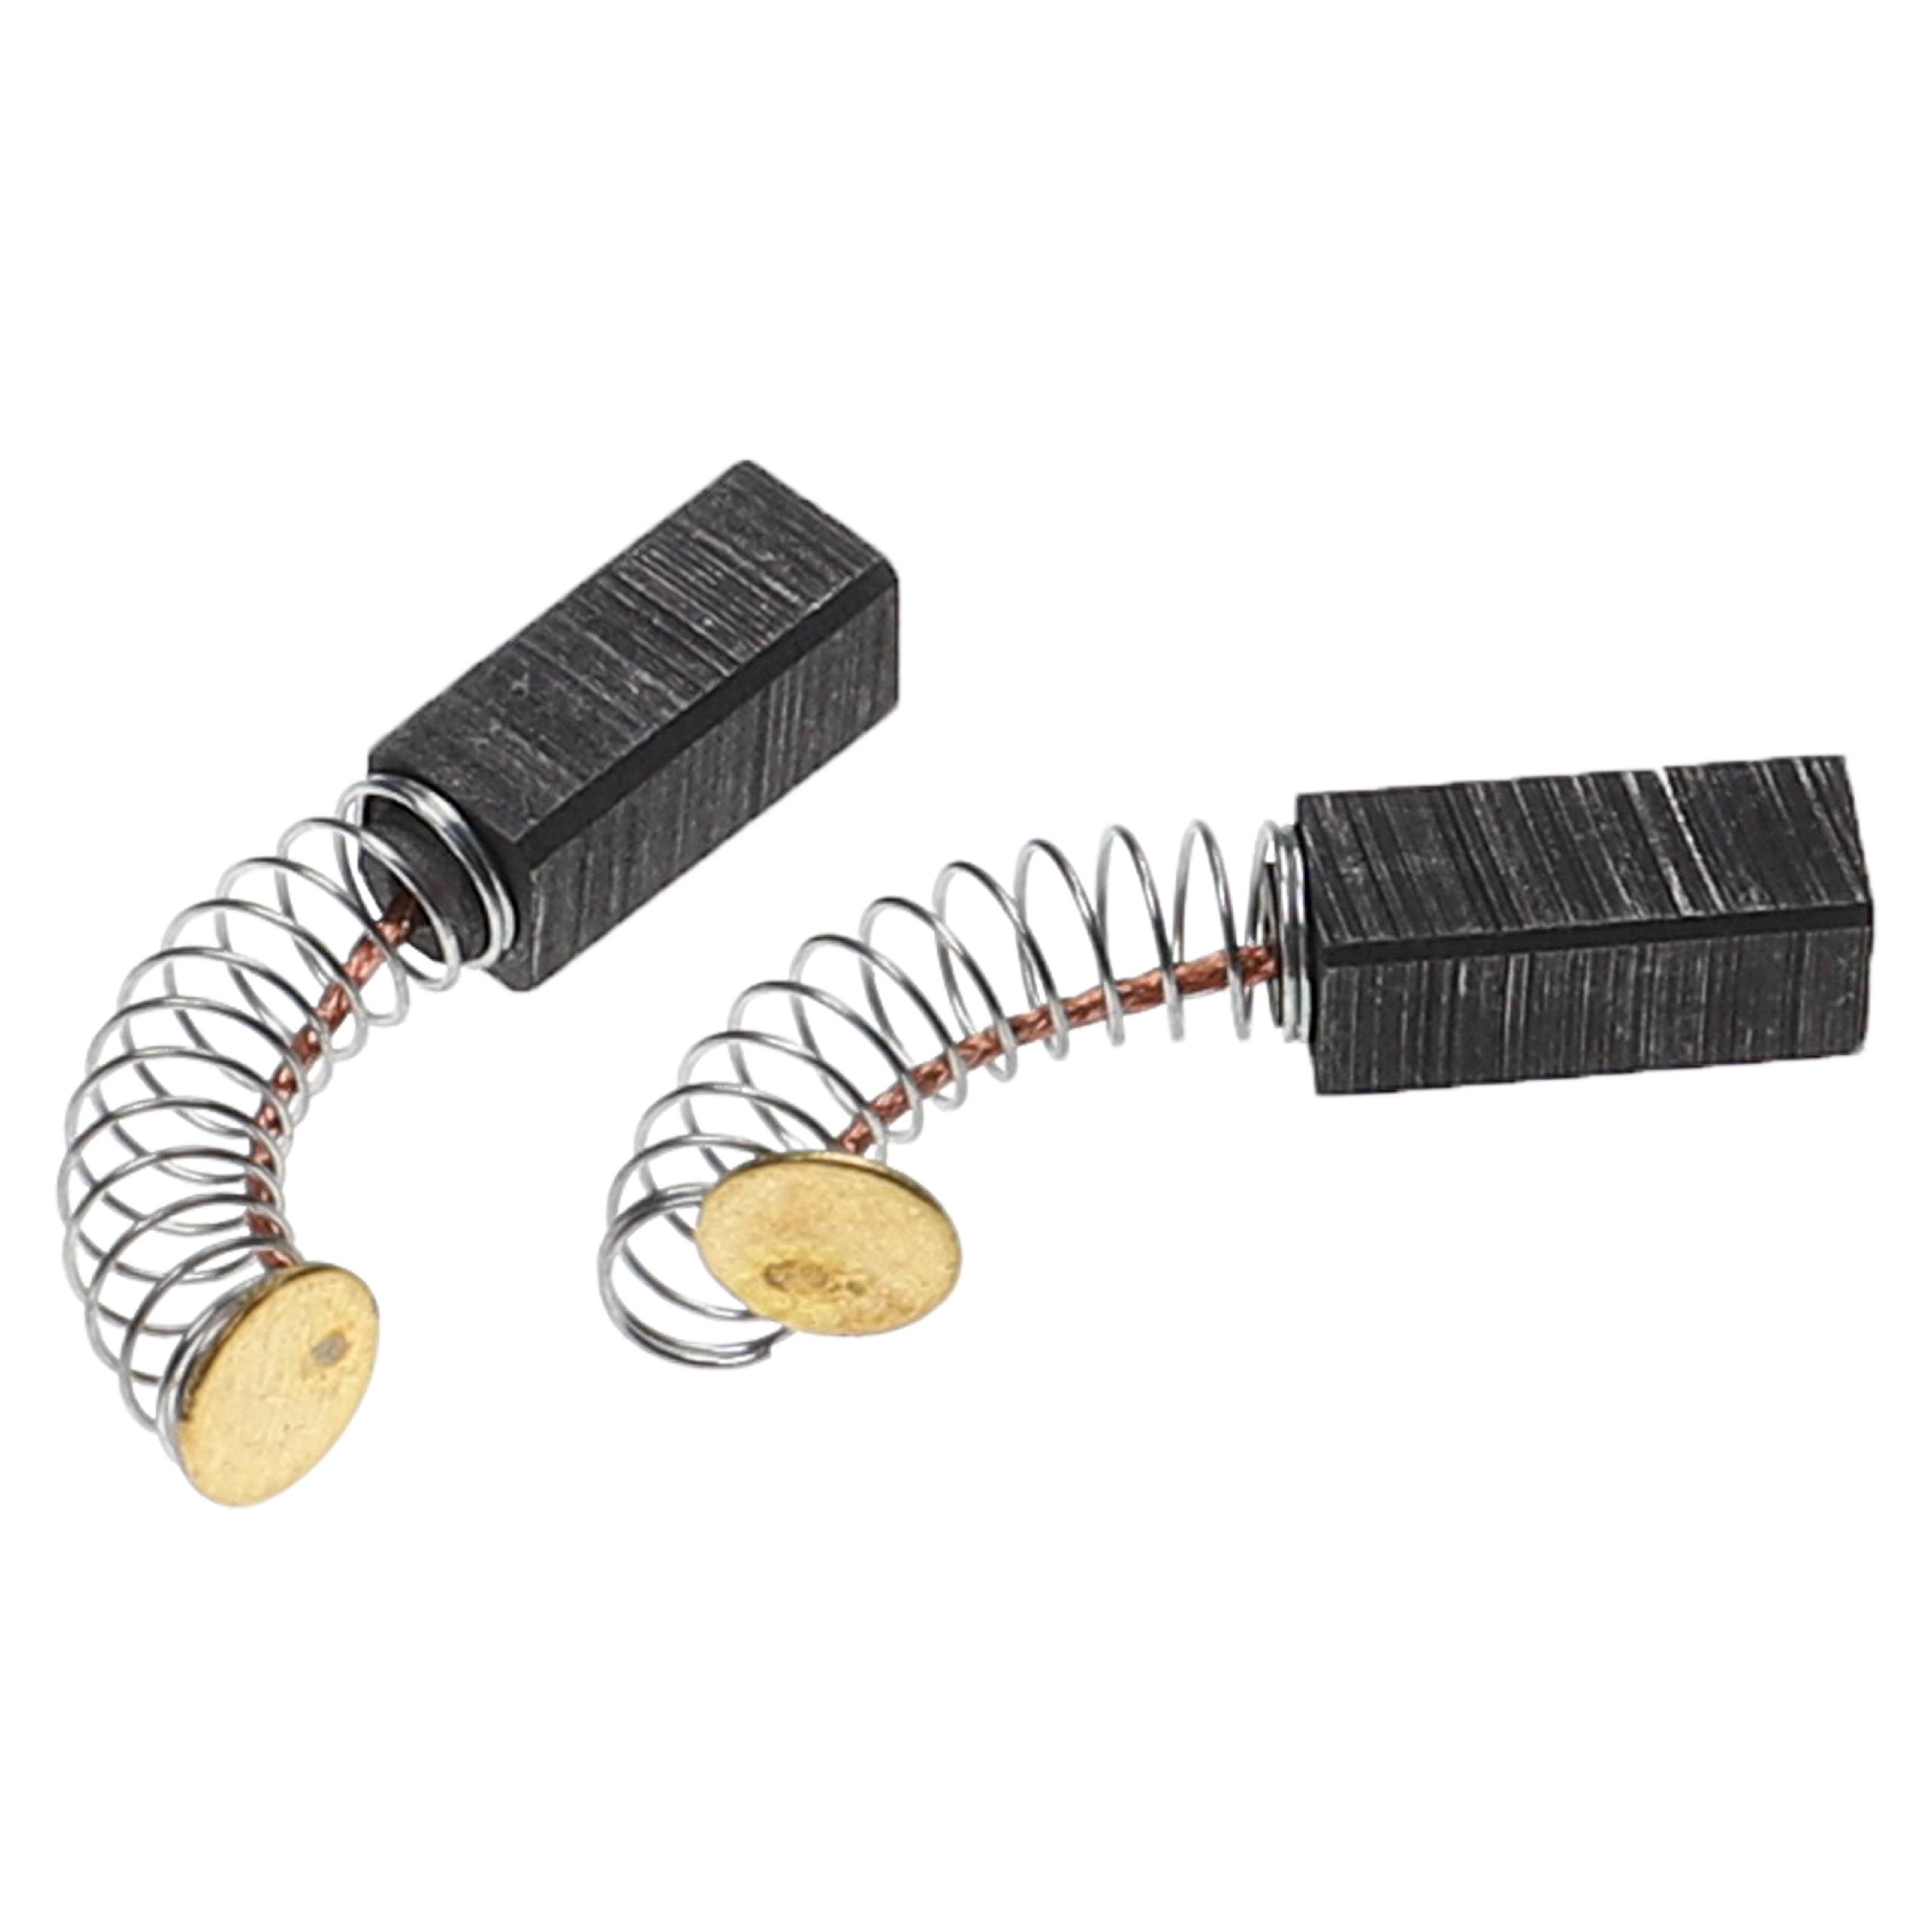 2x Carbon Brush as Replacement for Bosch 2.604.321.904 Electric Power Tools + Spring, 6.3 x 6.3 x 15.5mm